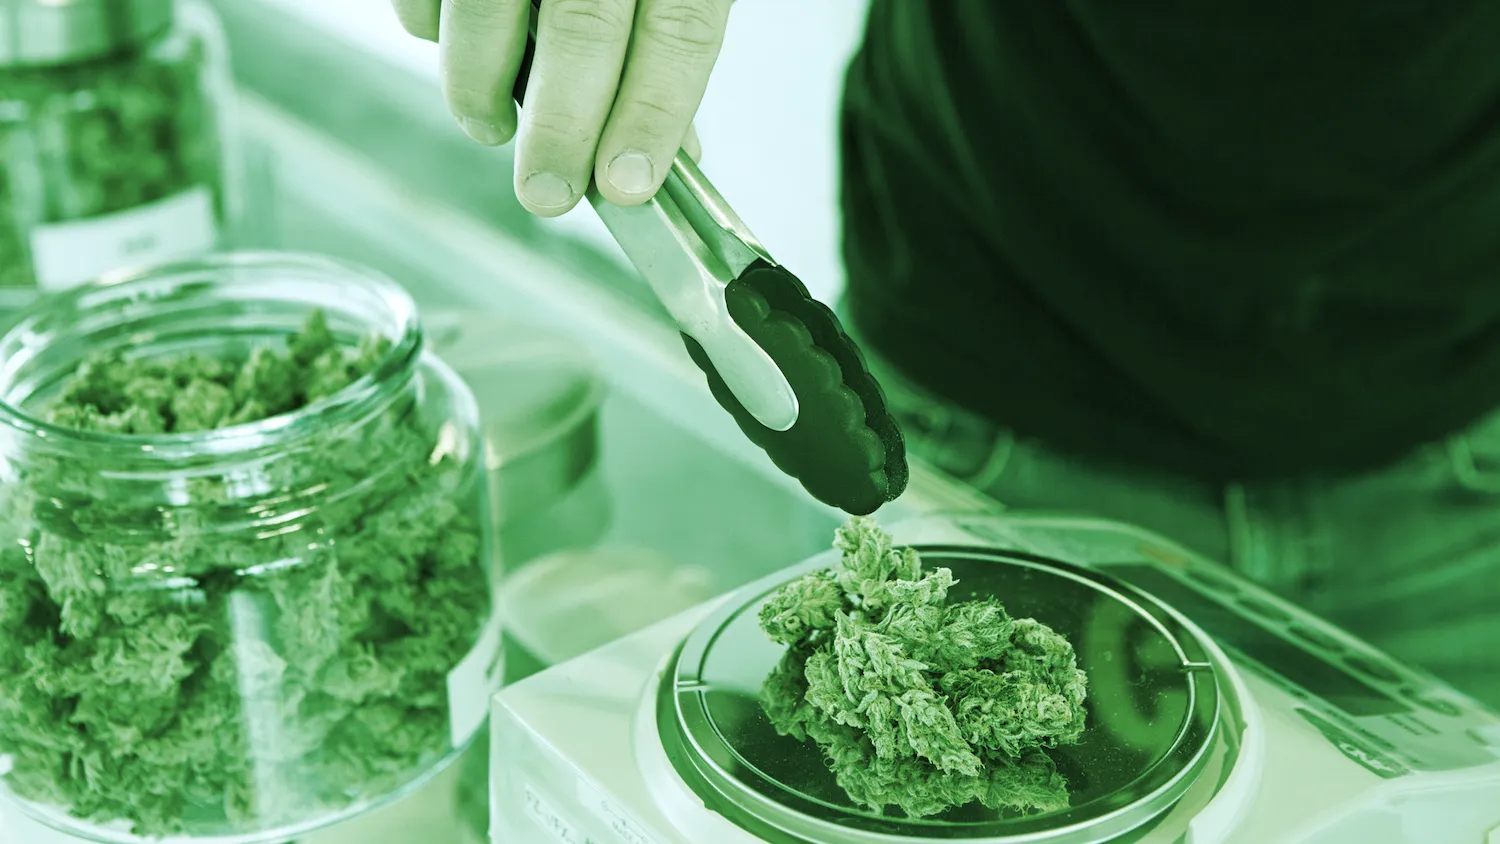 Cannabis dispensaries are in the metaverse, too. Image: Shutterstock